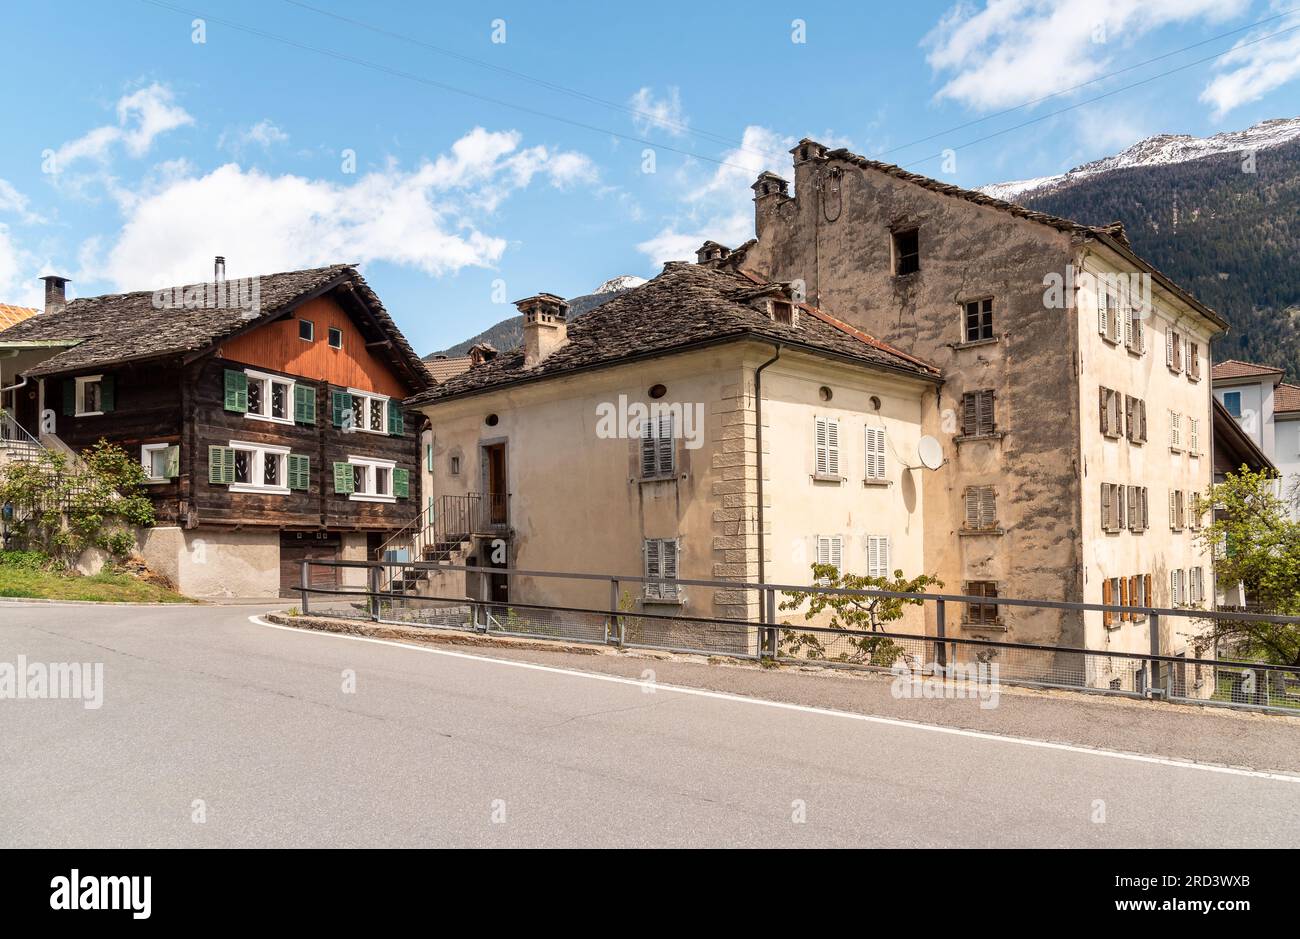 Street in the small village Chironico, is a fraction of the municipality of Faido, in the Canton of Ticino, district of Leventina, Switzerland Stock Photo